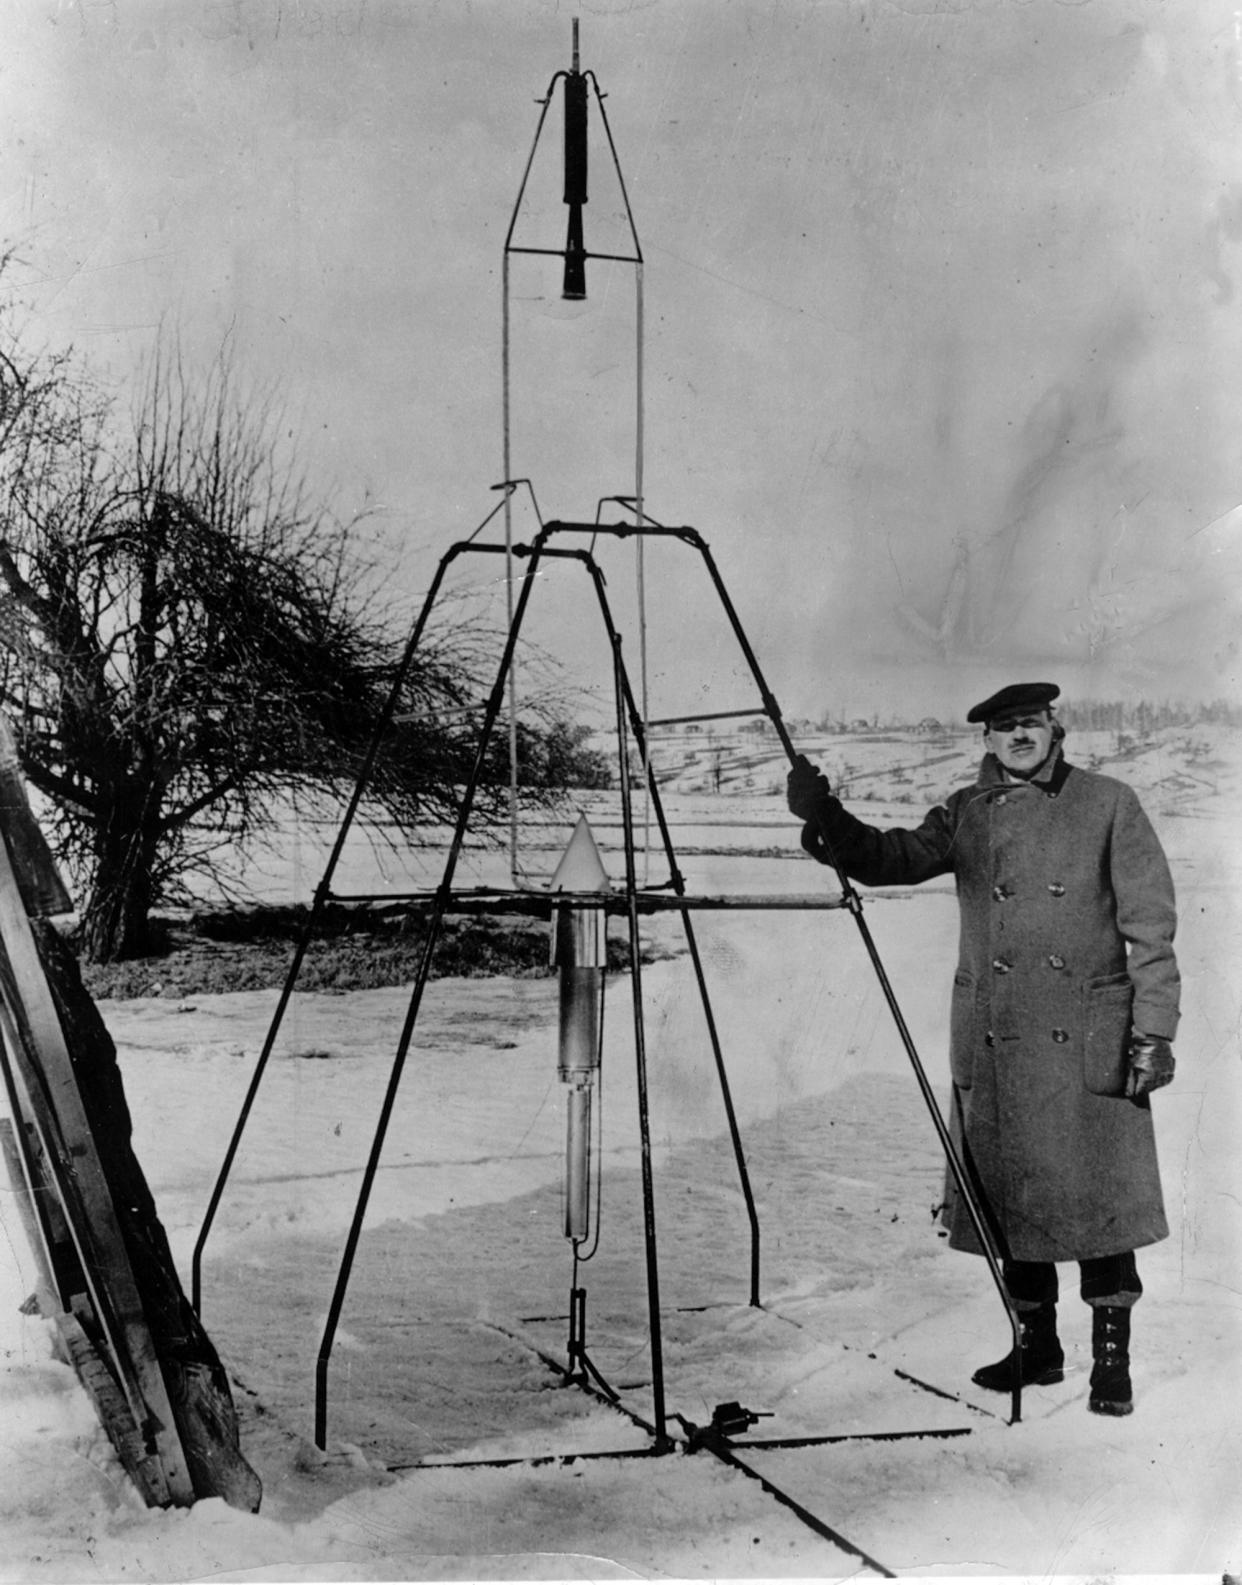 Robert H. Goddard stands with the world's first liquid-propellant rocket on Pakachoag Hill in Auburn  March 16, 1926. When launched, the rocket soared 341 feet high and 184 feet downrange in 2.5 seconds.